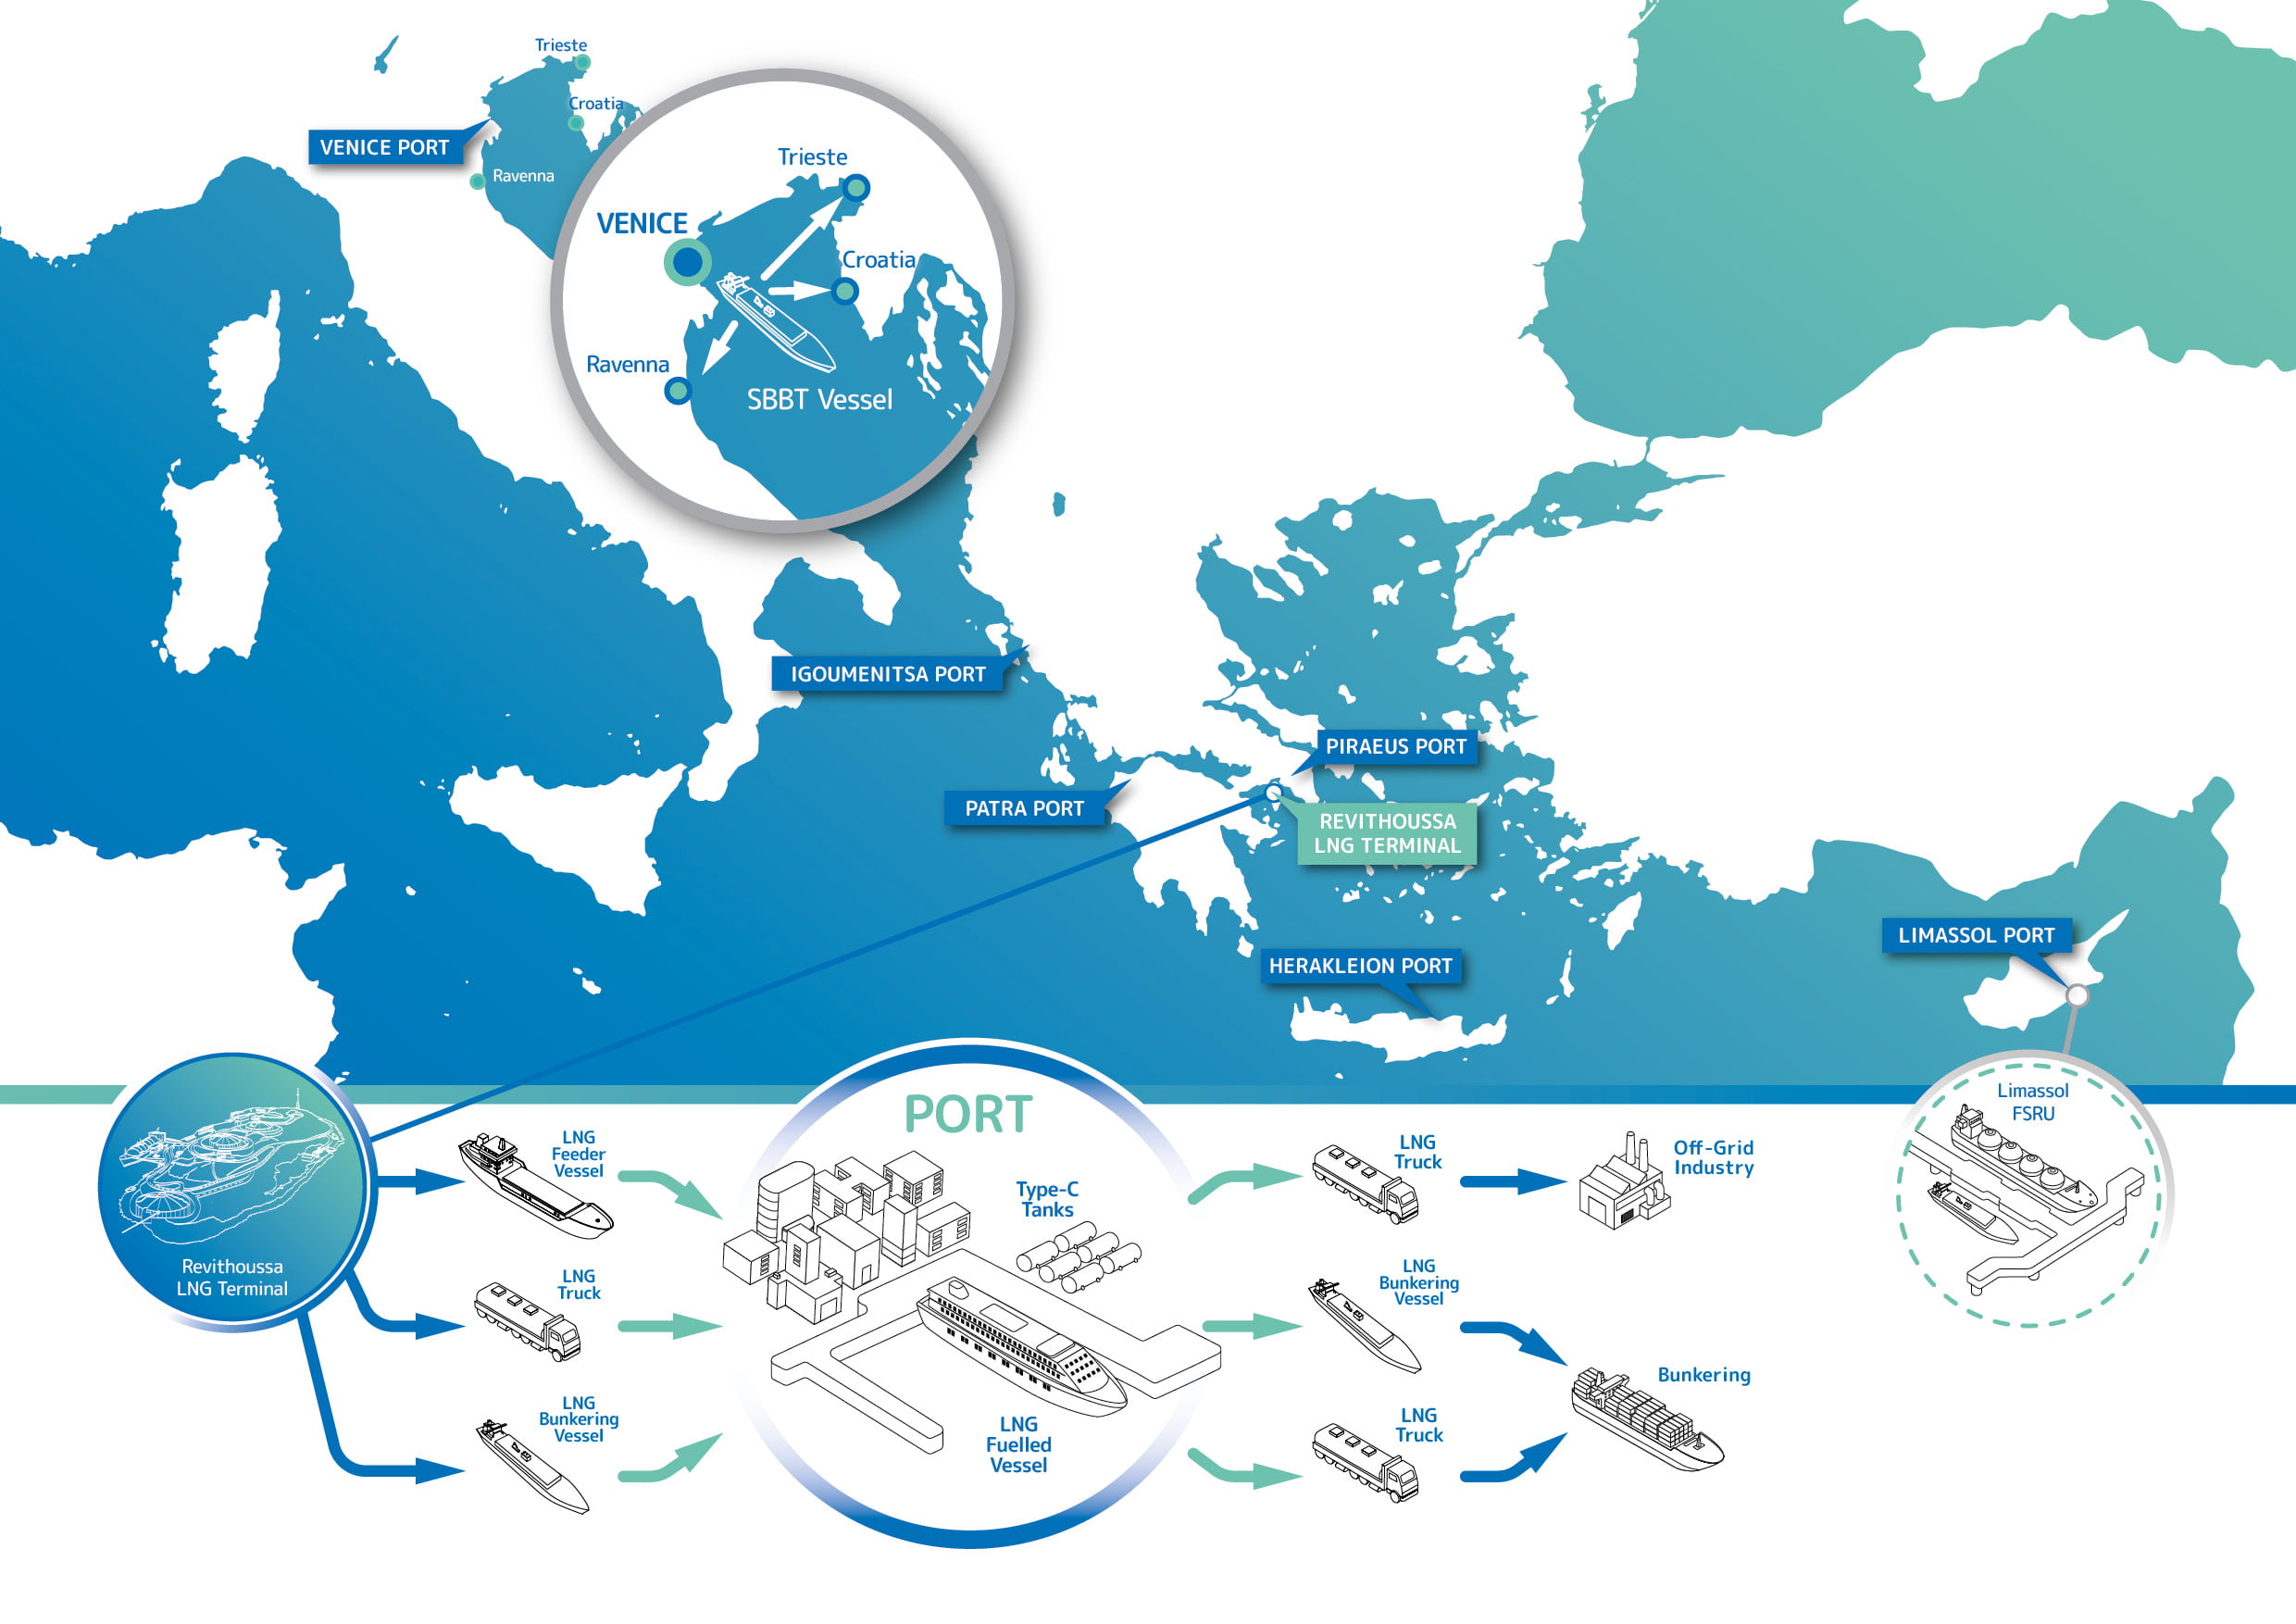 Poseidon Med II brings into reality sustainable shipping in the Eastern Mediterranean